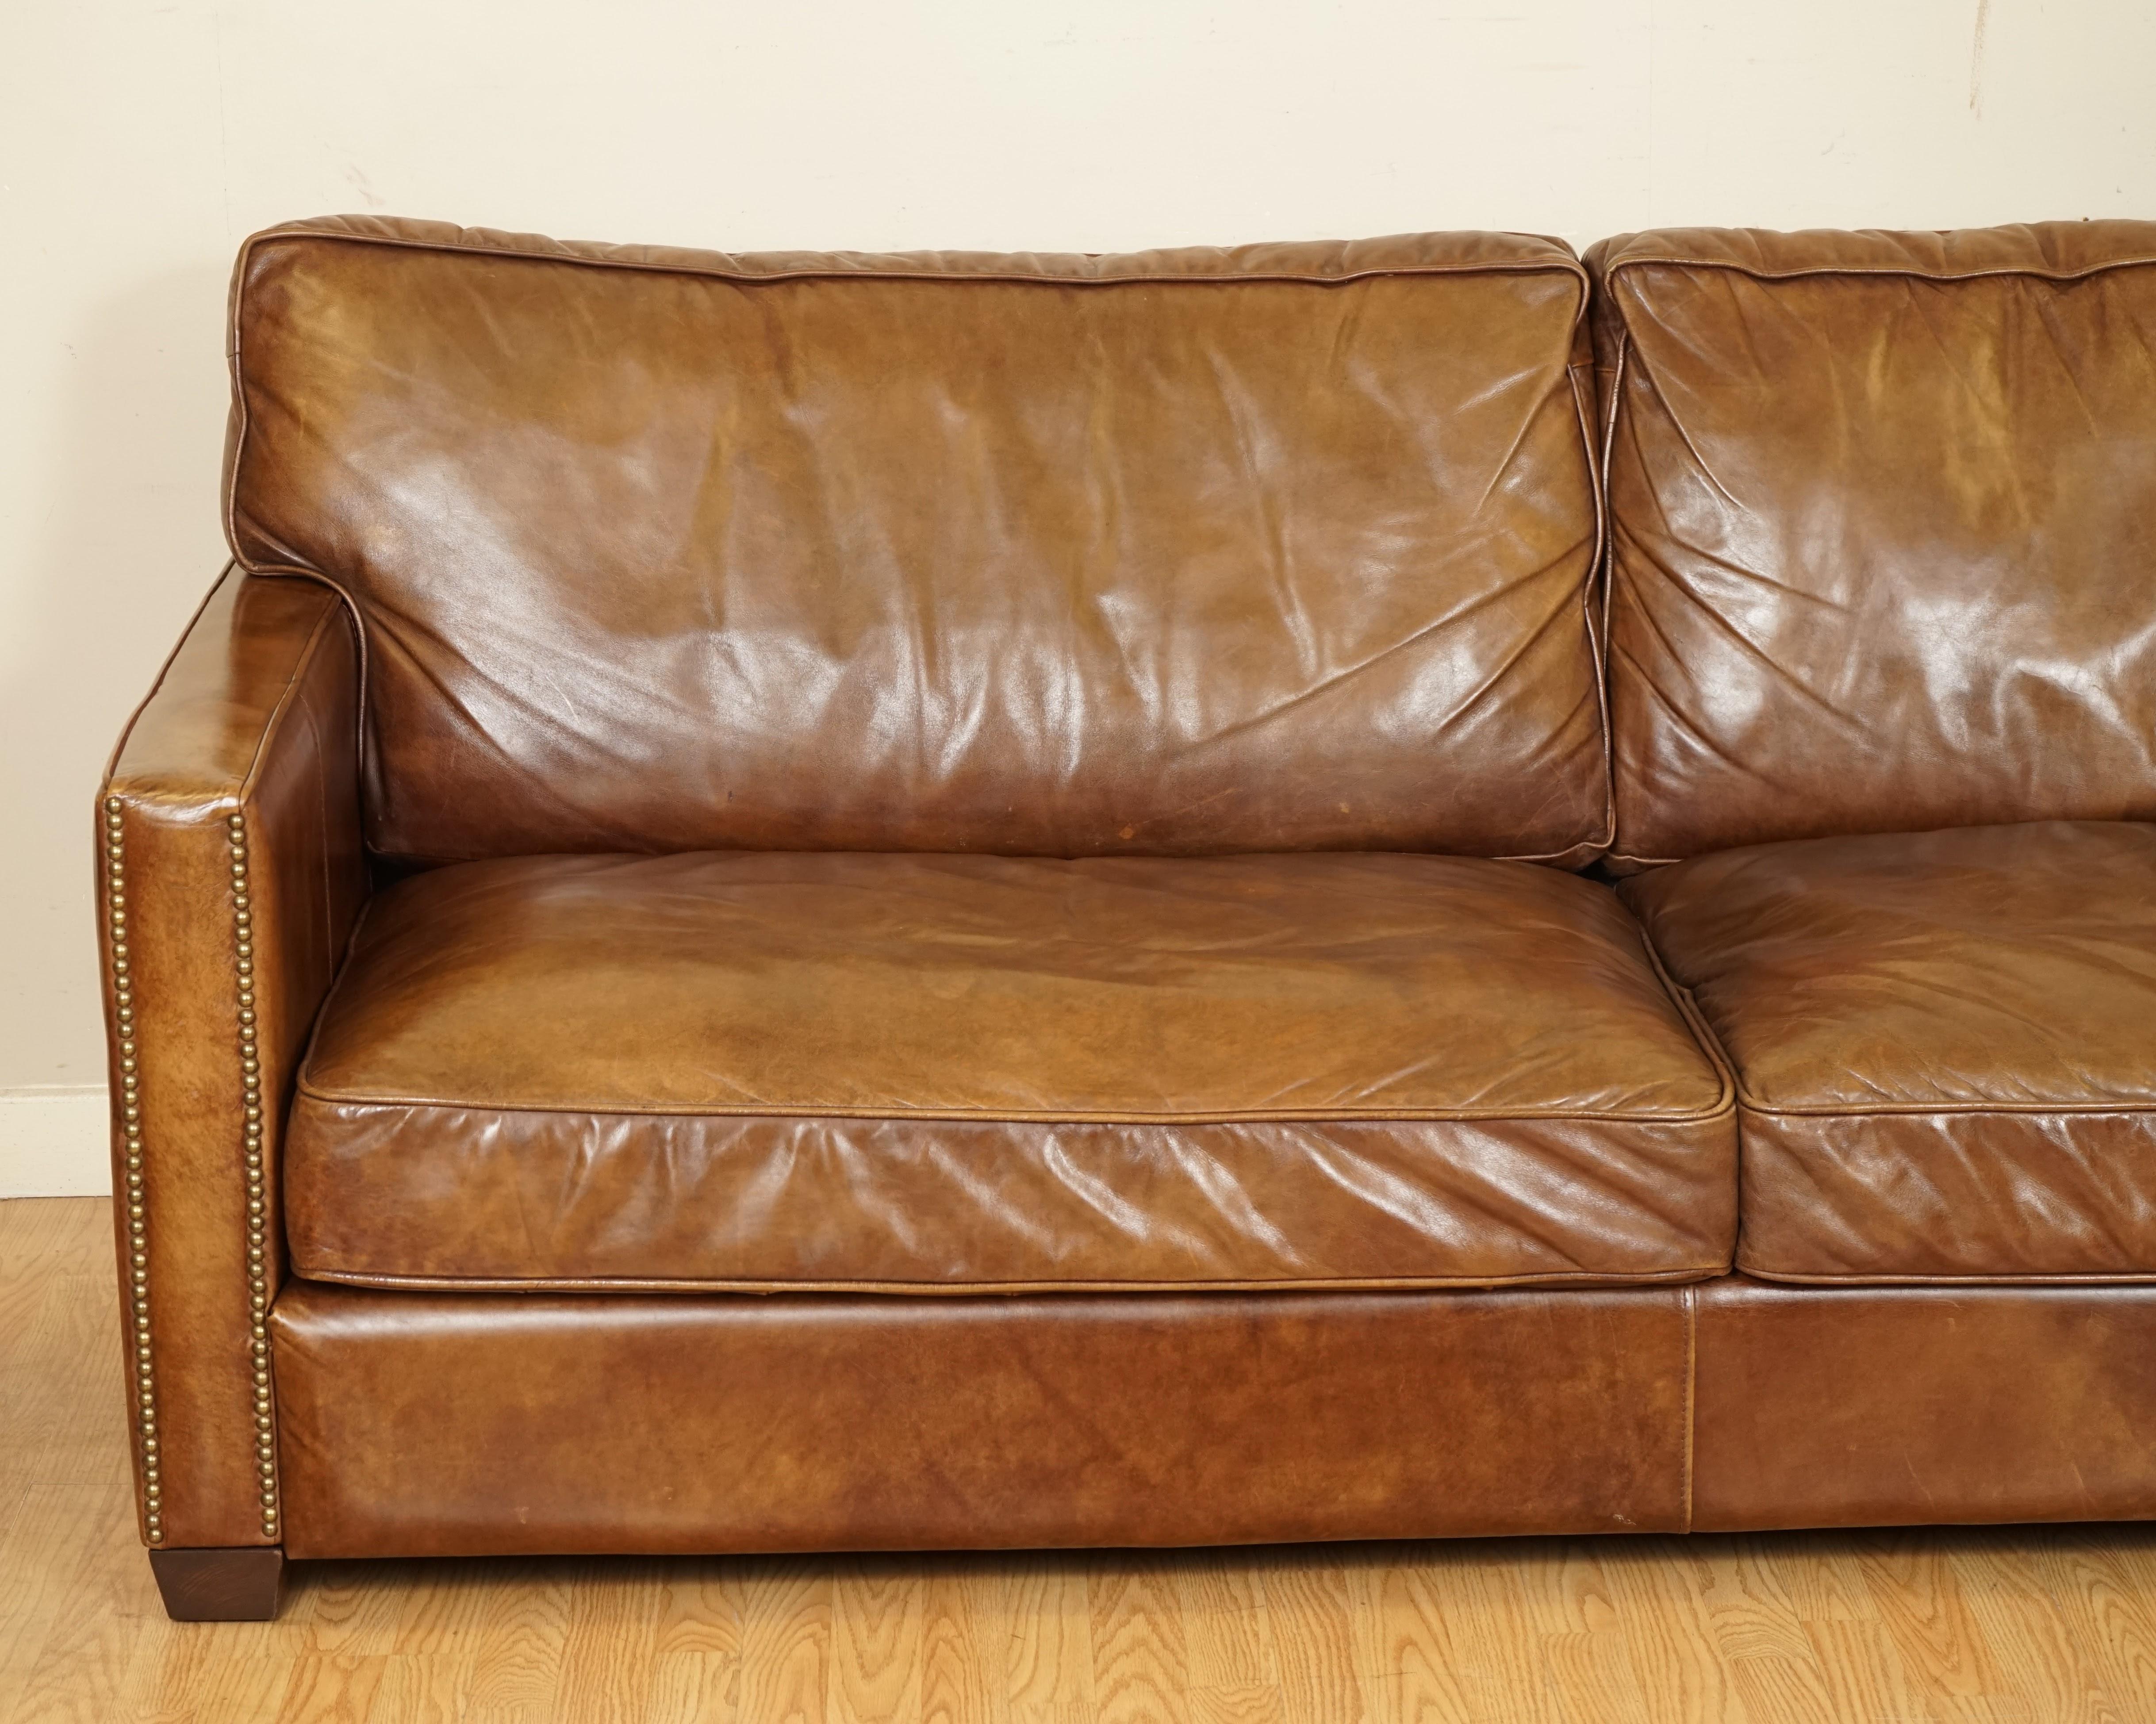 20th Century Gorgeous Timothy Oulton Viscount Old Sadle Nut Brown Leather Three Seater Sofa